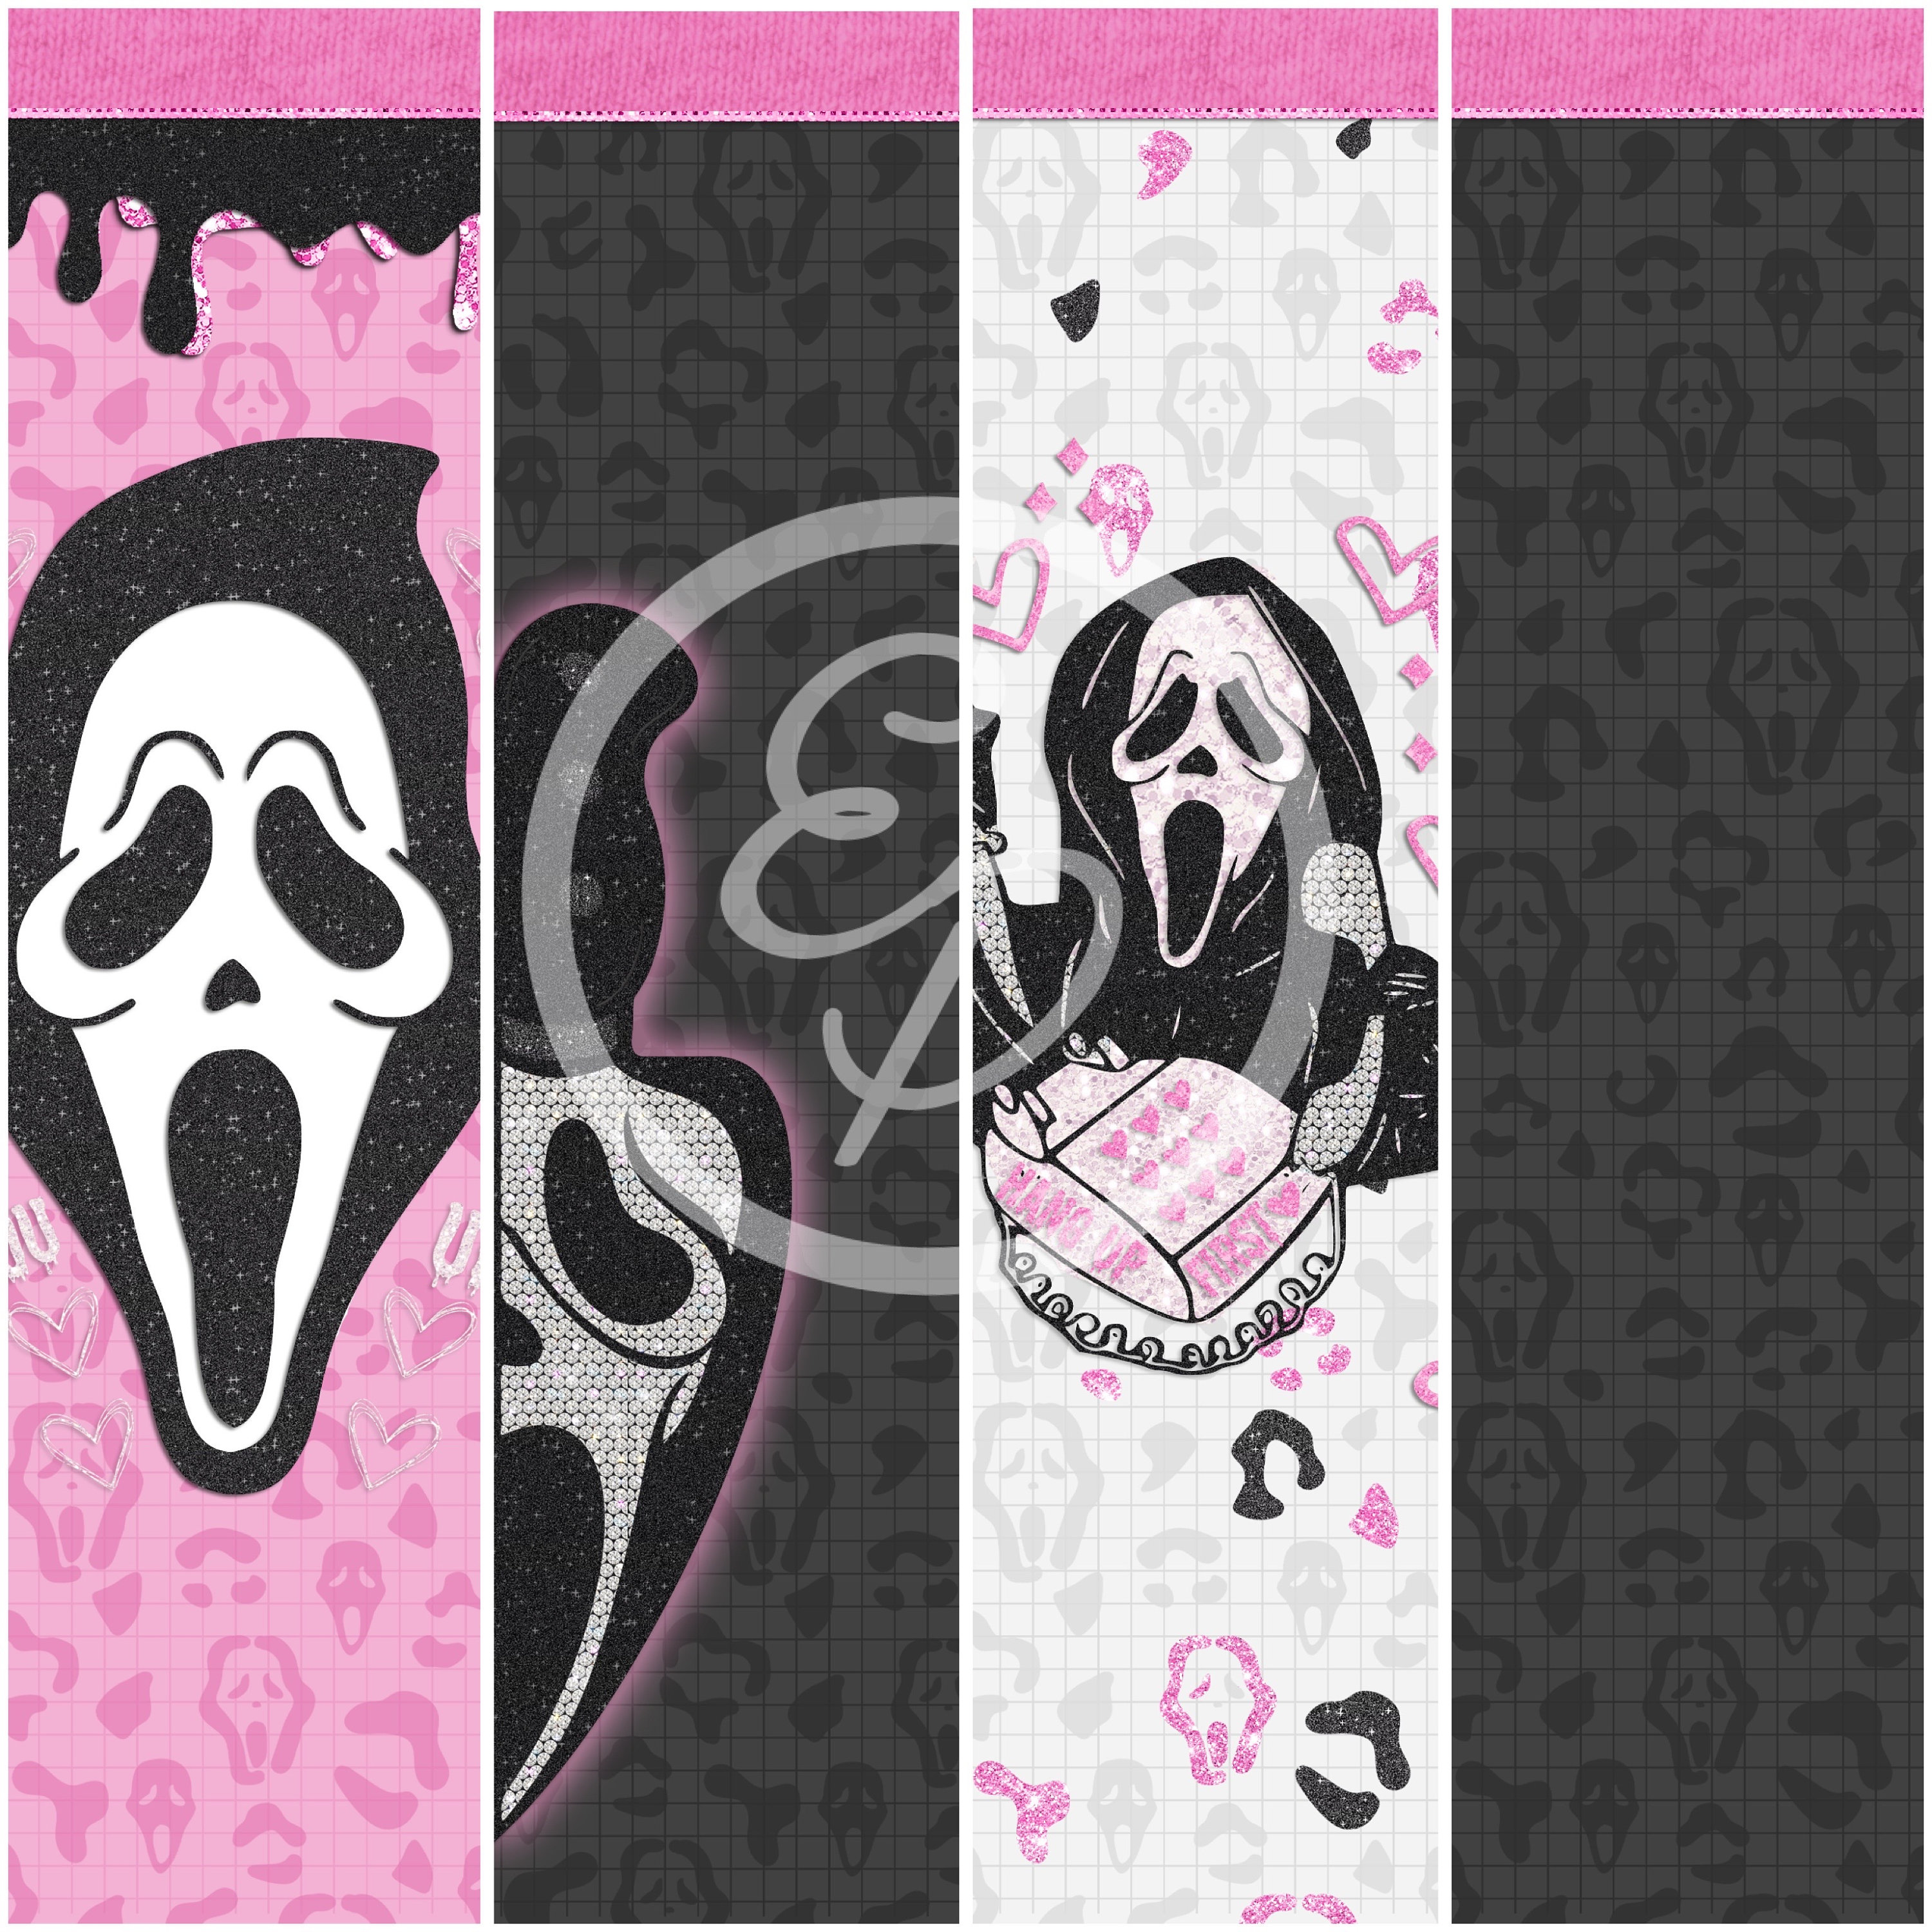 1080x1920 Ghostface Wallpapers for IPhone 6S 7 8 Retina HD